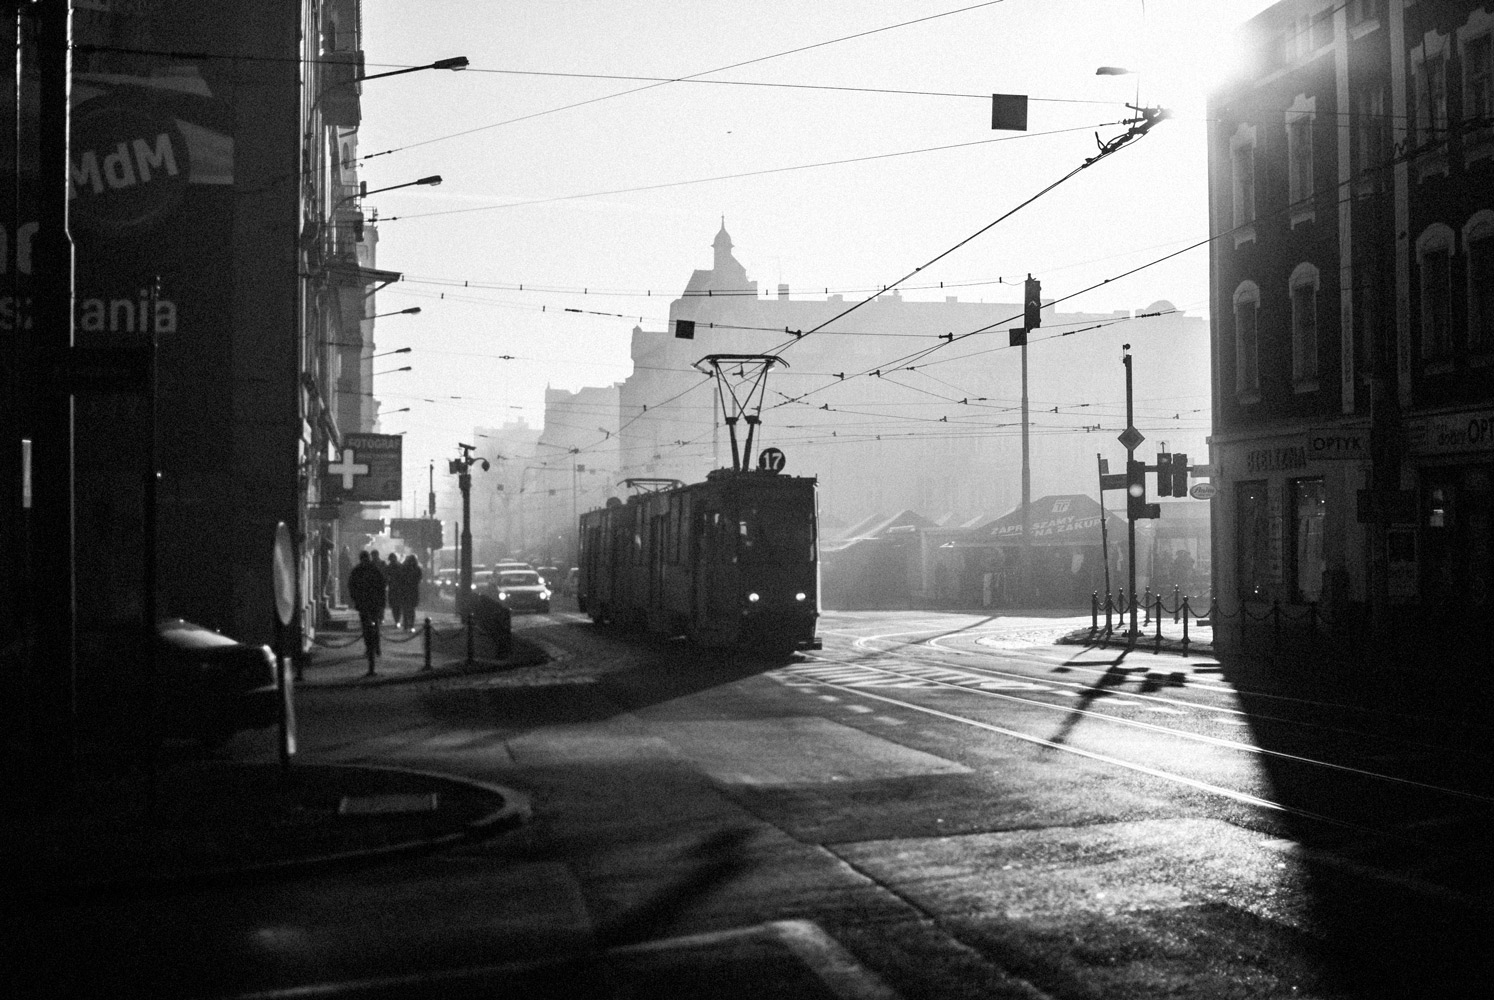 Black and white photo of an urban street scene in Poland. There are buildings, cars, pedestrians, and a tram running on steel rails with an overhead wire for power.